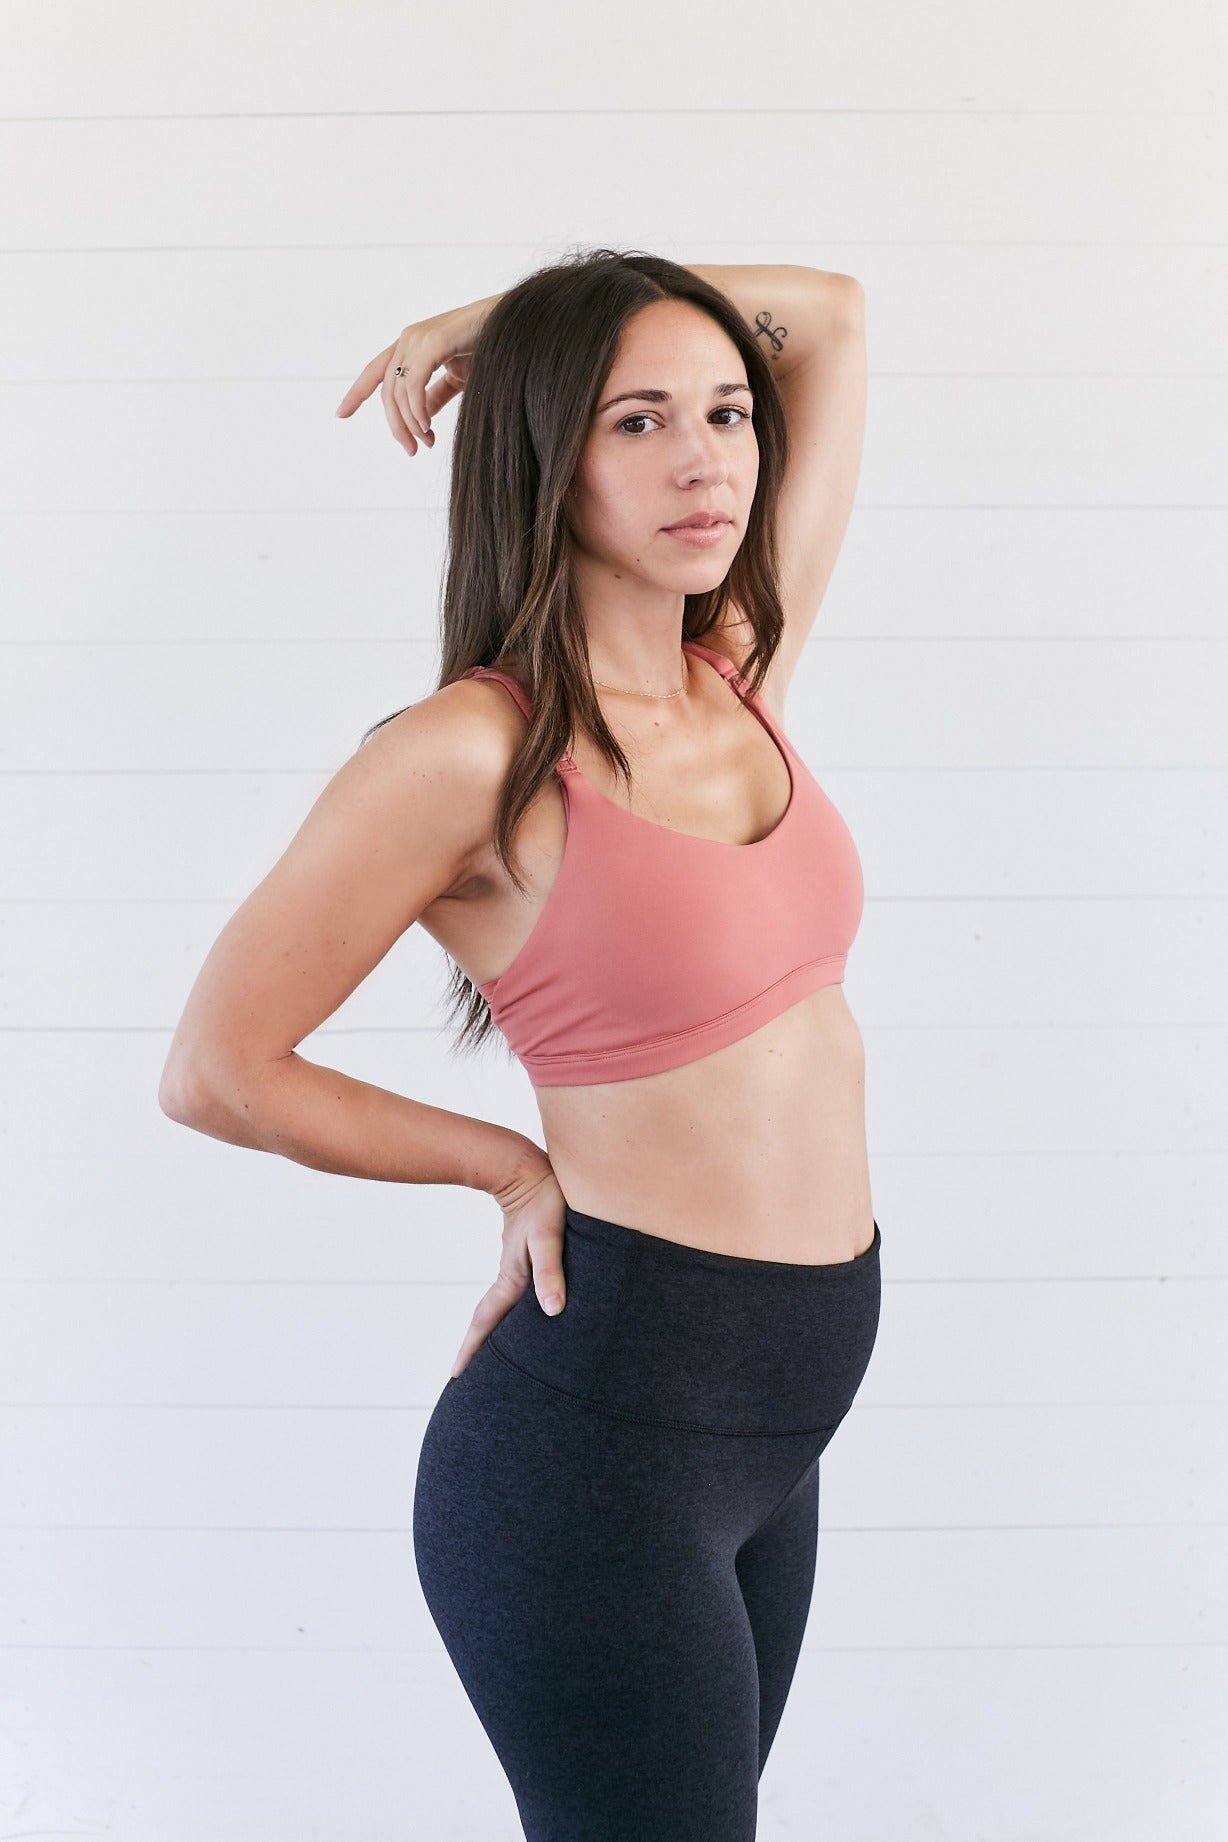 Meet Anook Athletics, The New Athleticwear Brand For Moms - Austin